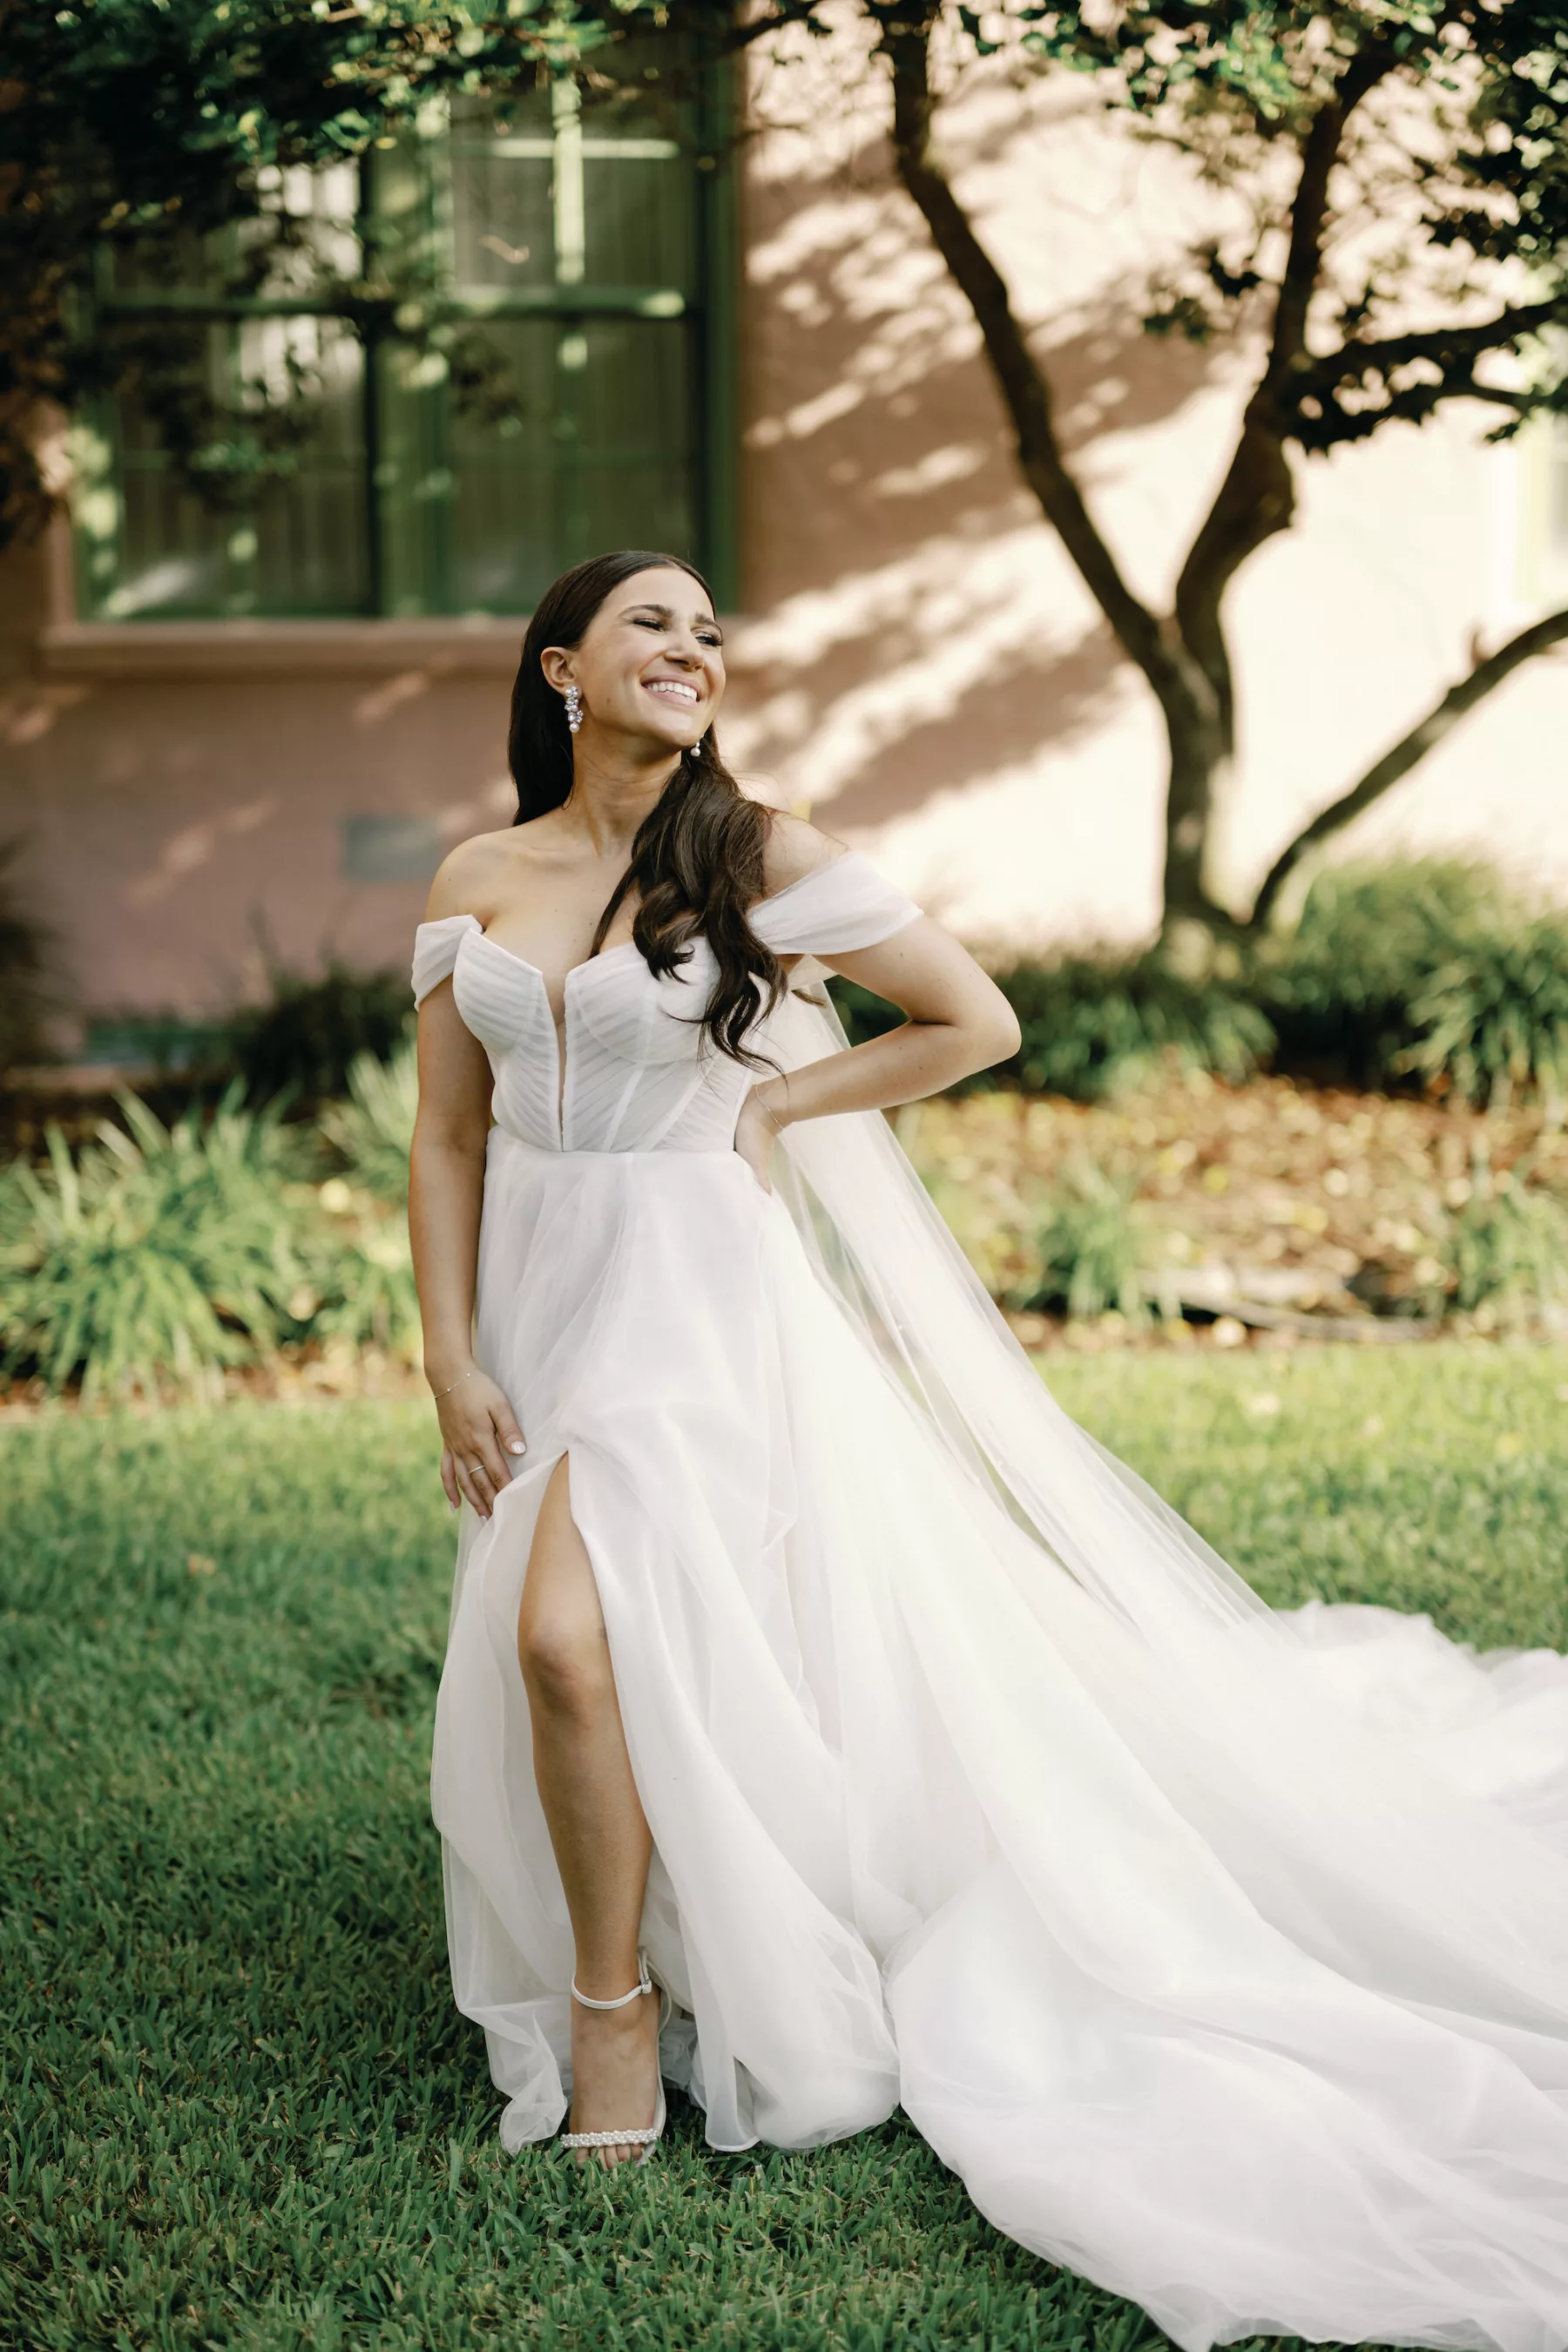 Ivory Off The Shoulder Boned Bodice Chiffon A Line Martina Liana Wedding Dress Inspiration | Romantic Bridal Hair and Makeup Ideas | Bride Reading Card from Groom on Wedding Day | Tampa Bay Content Creator Behind The Vows | Photographer Dewitt for Love Photography